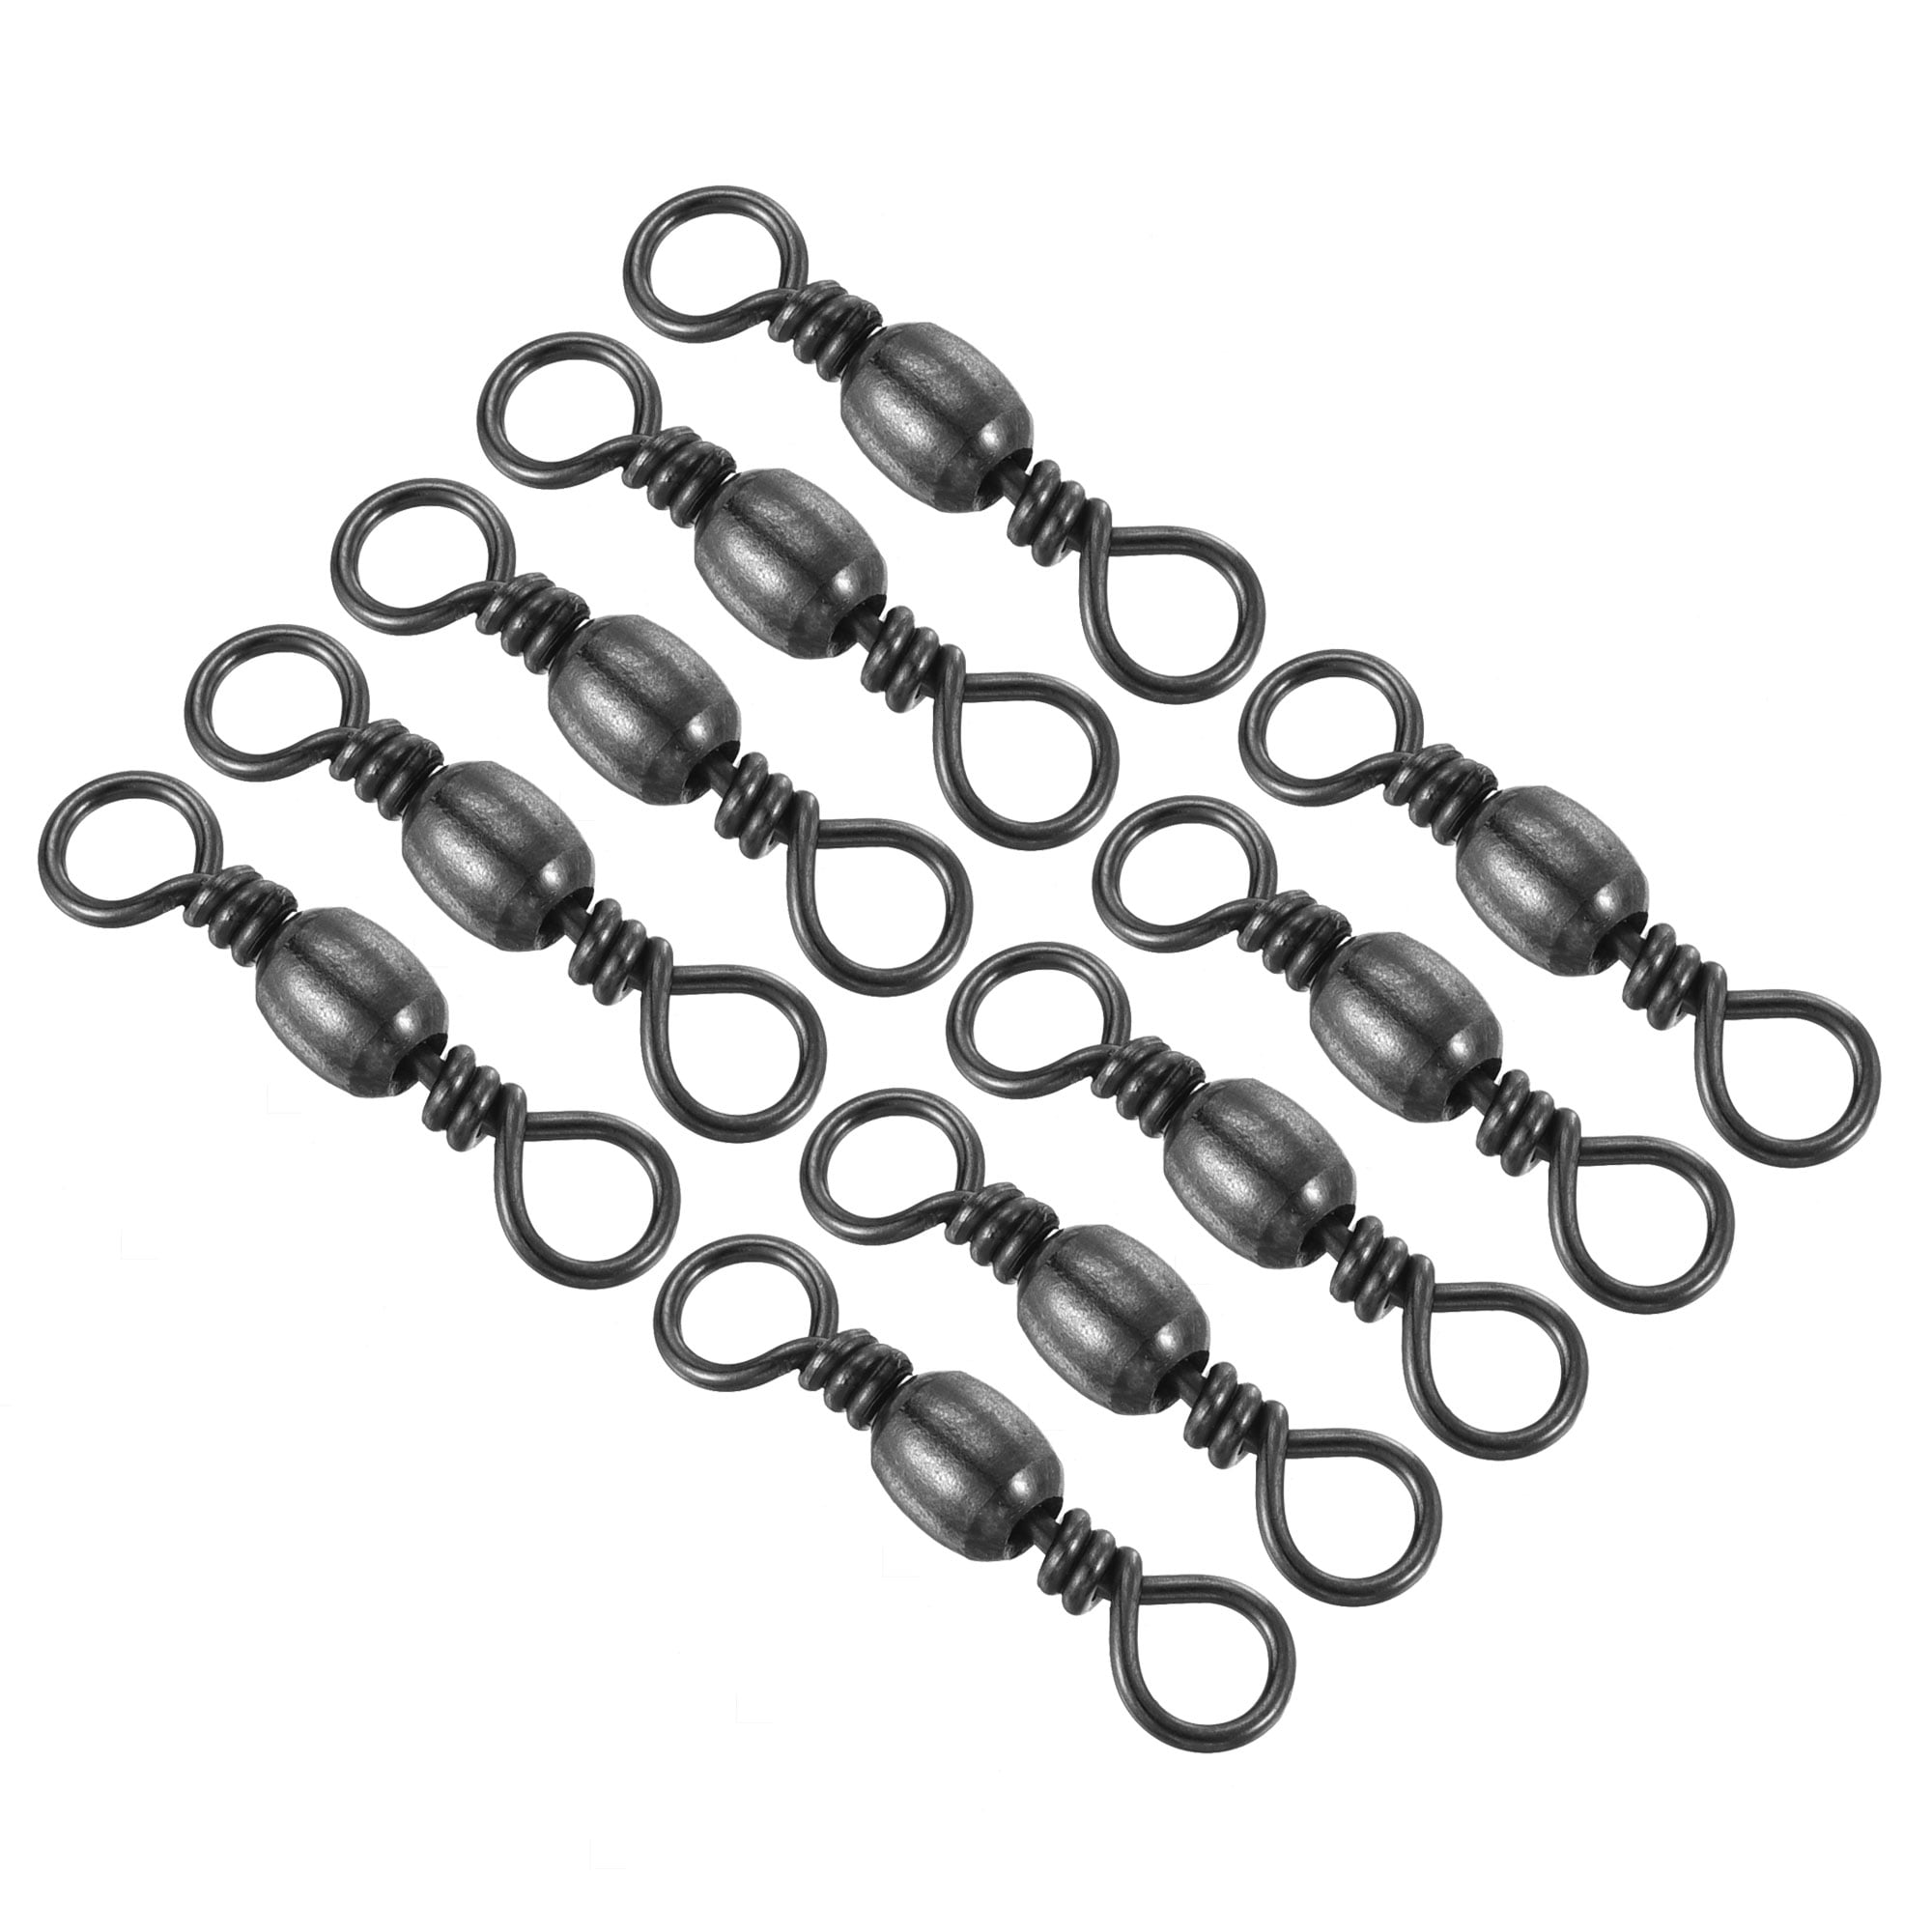 Uxcell 99LBS Stainless Steel Fishing Barrel Swivels, Black 50 Pack 